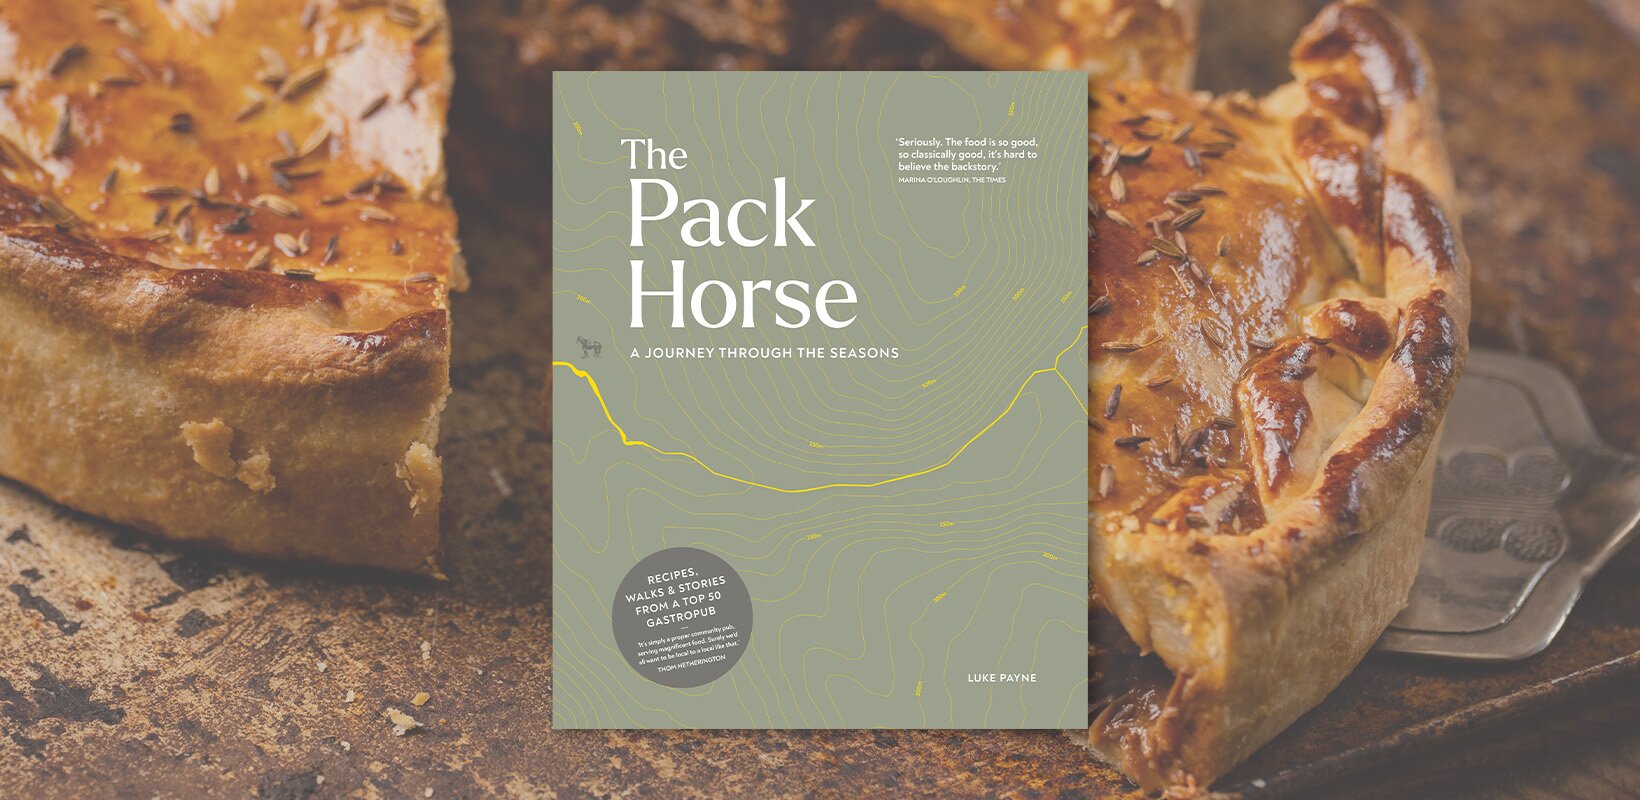 Book review: The Pack Horse by Luke Payne